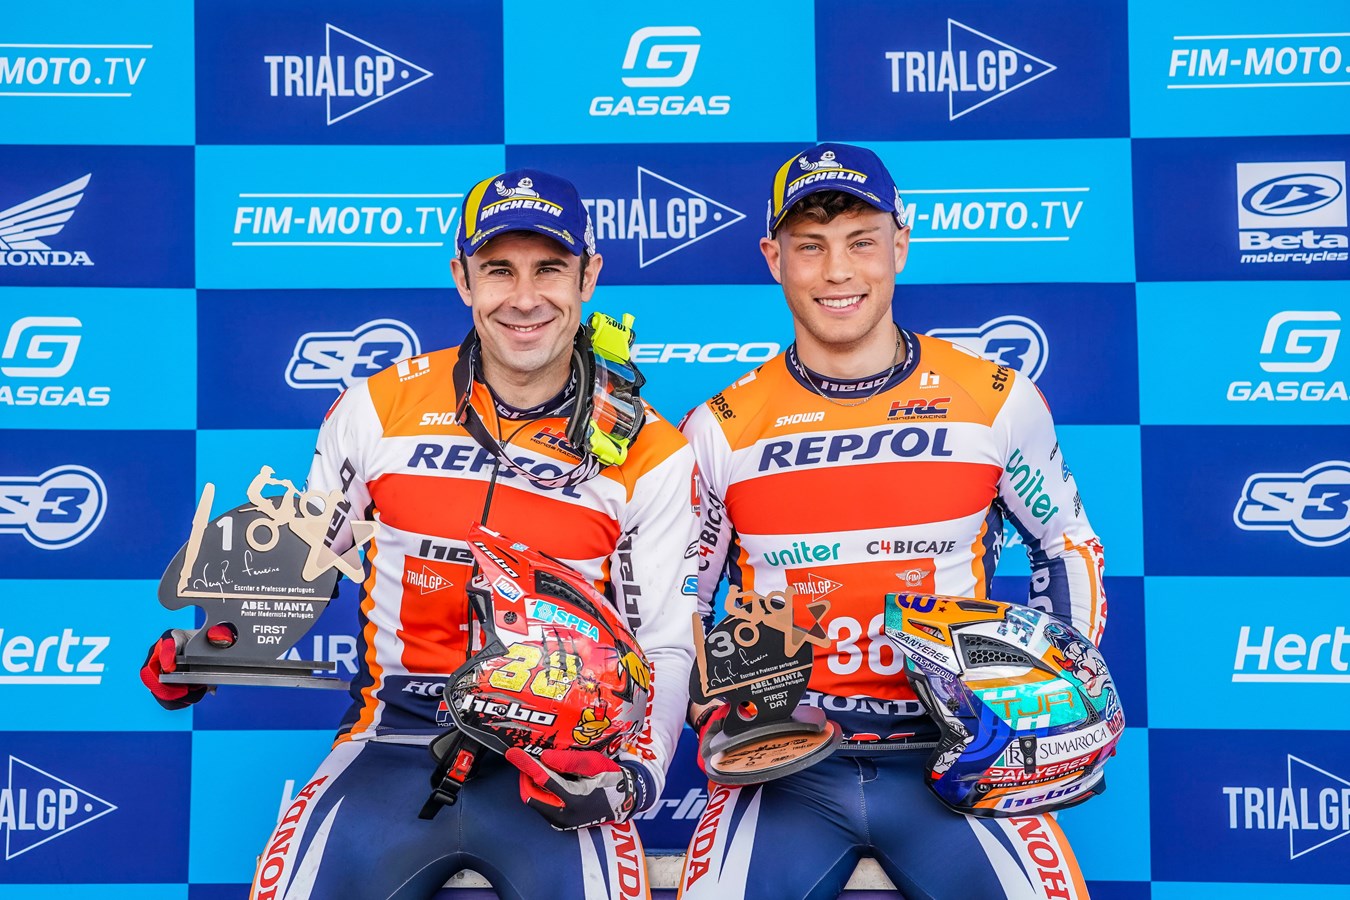 Bou wins with Marcelli third in Portugal